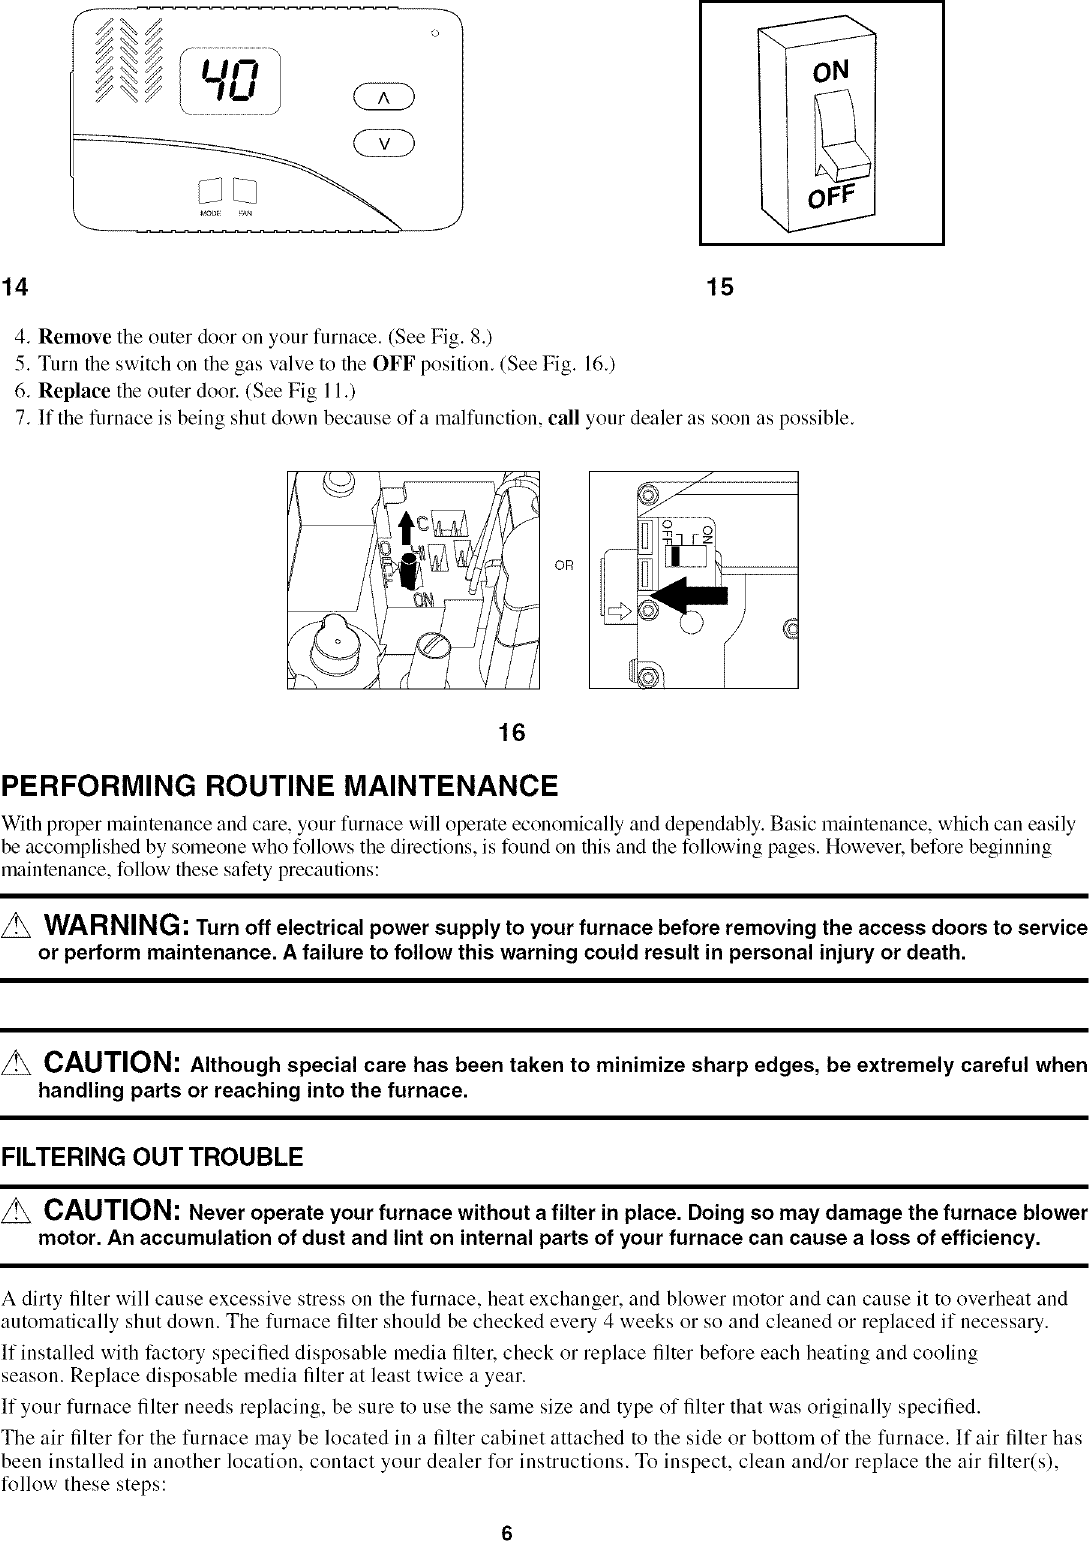 Page 6 of 12 - PAYNE  Furnace/Heater, Gas Manual L0408334